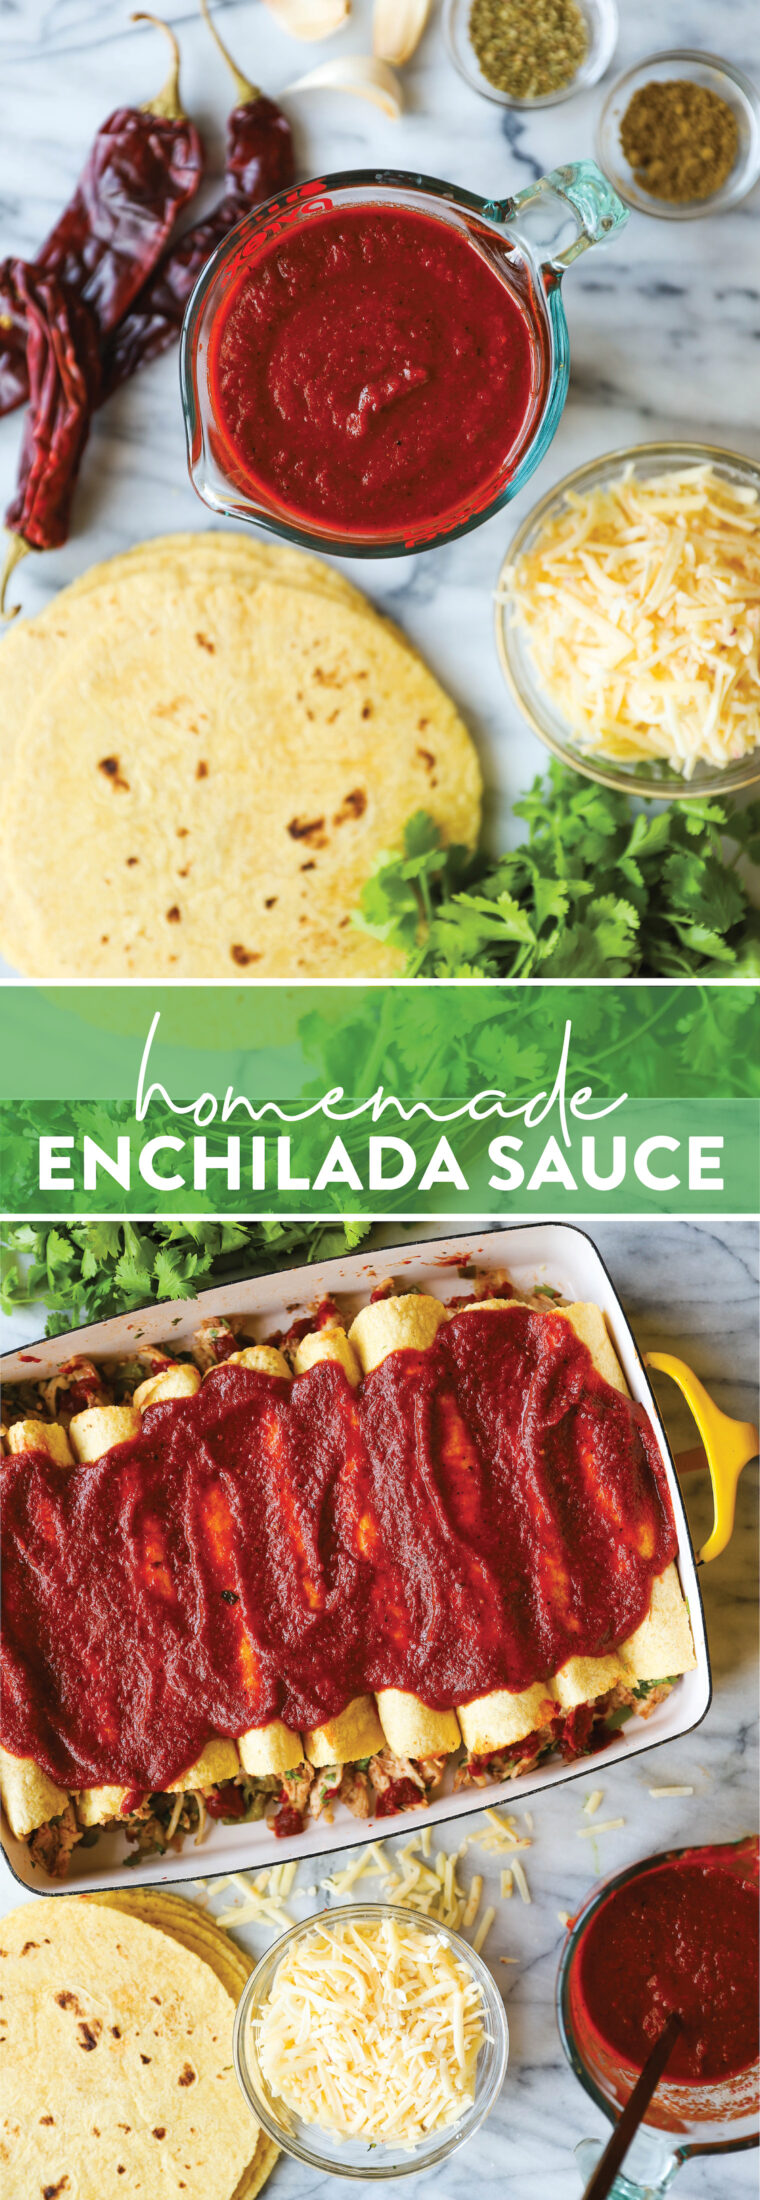 Homemade Enchilada Sauce - Made with whole dried chiles, this will take your enchiladas to the NEXT level! No more store-bought sauce!